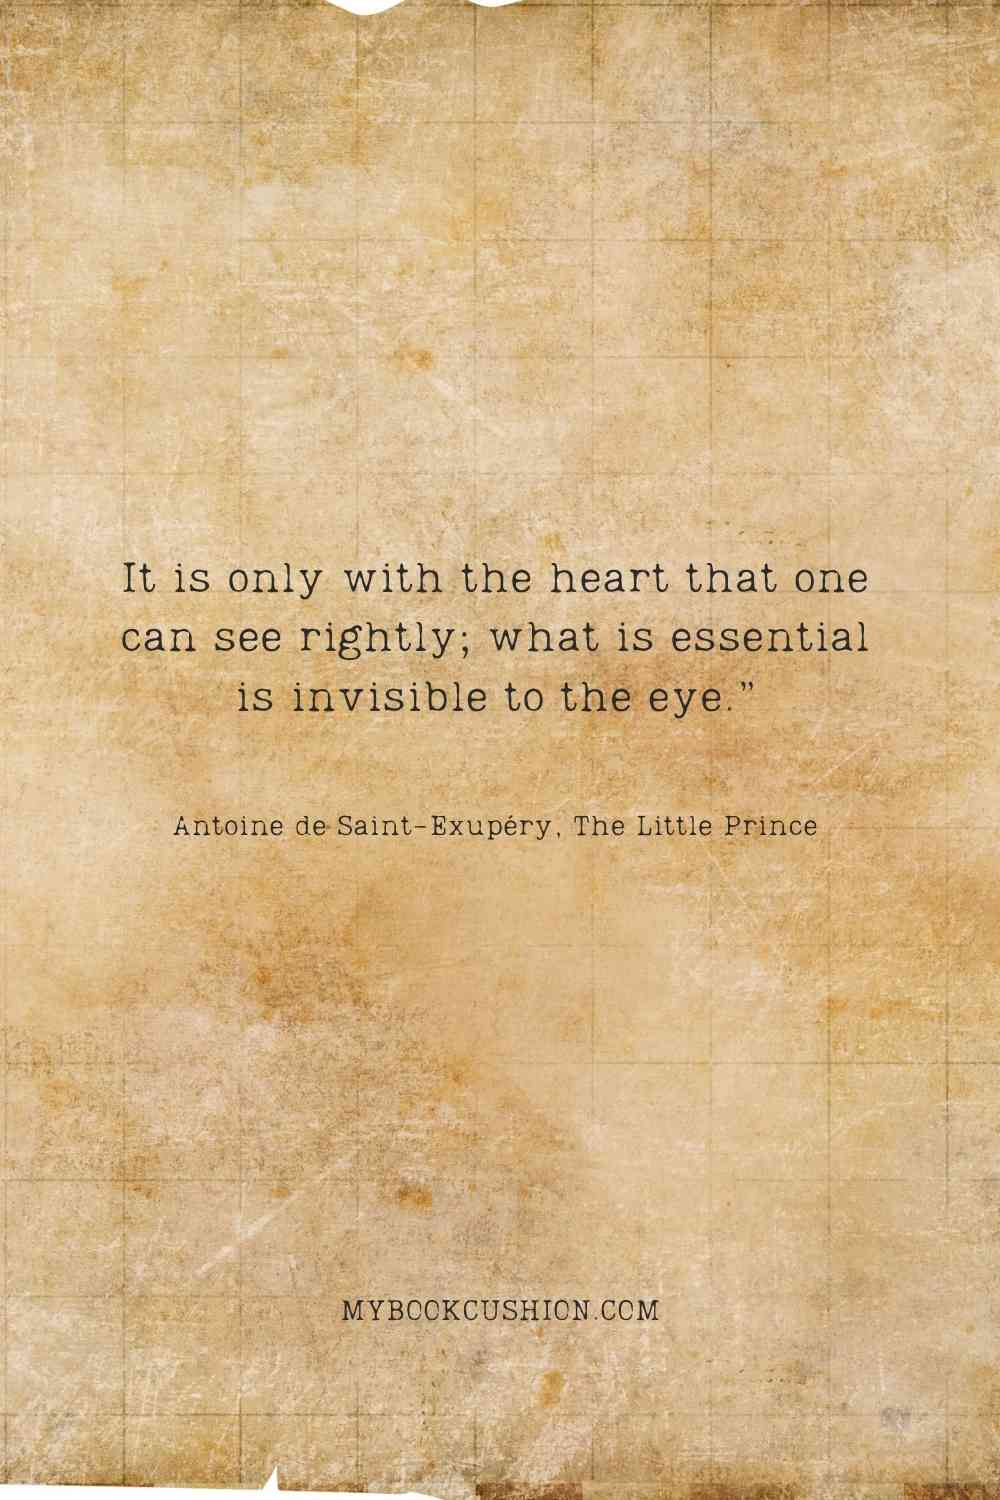 It is only with the heart that one can see rightly; what is essential is invisible to the eye.” - Antoine de Saint-Exupéry, The Little Prince